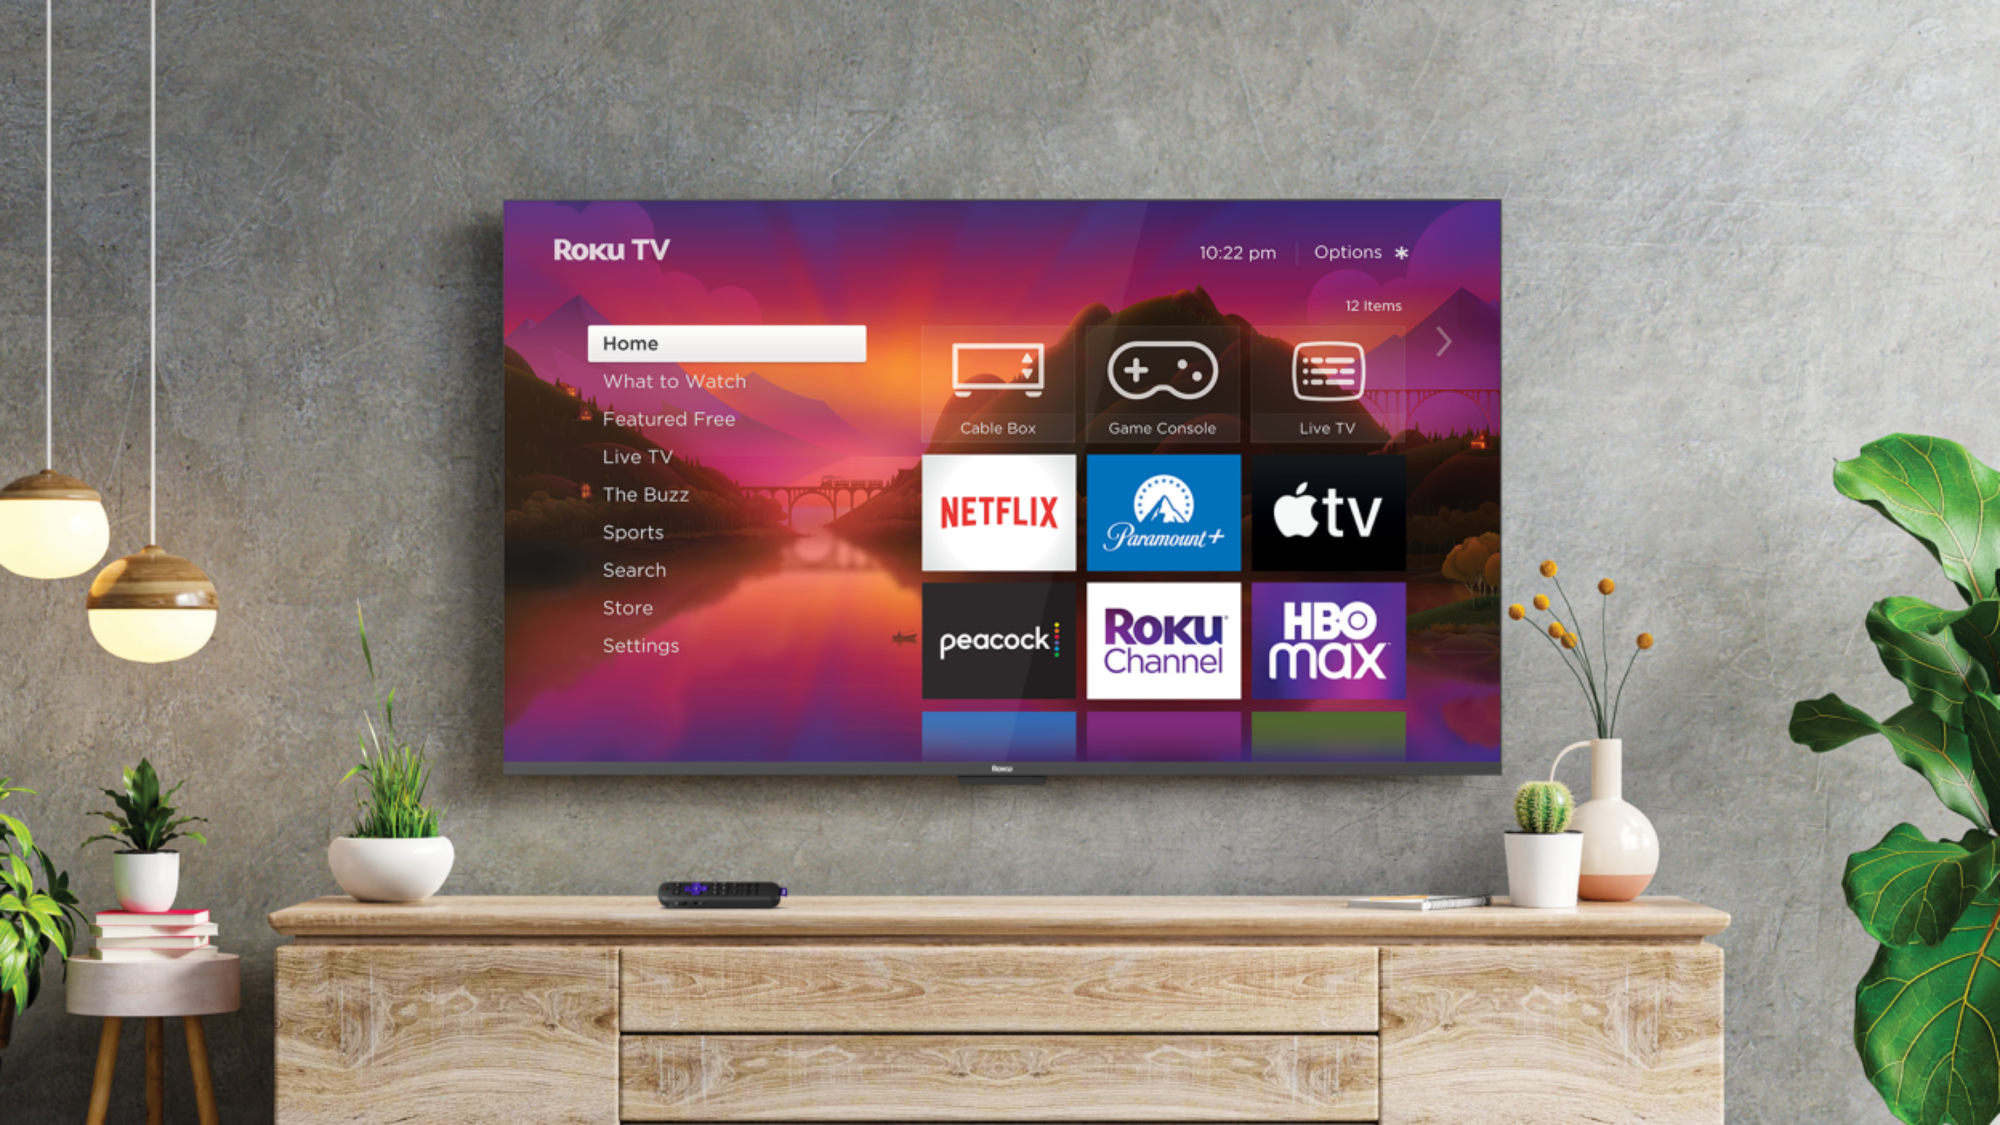 TV showing different streaming services including Netflix, Paramount+, Aplle TV, peacock, Rotku and HBO Max